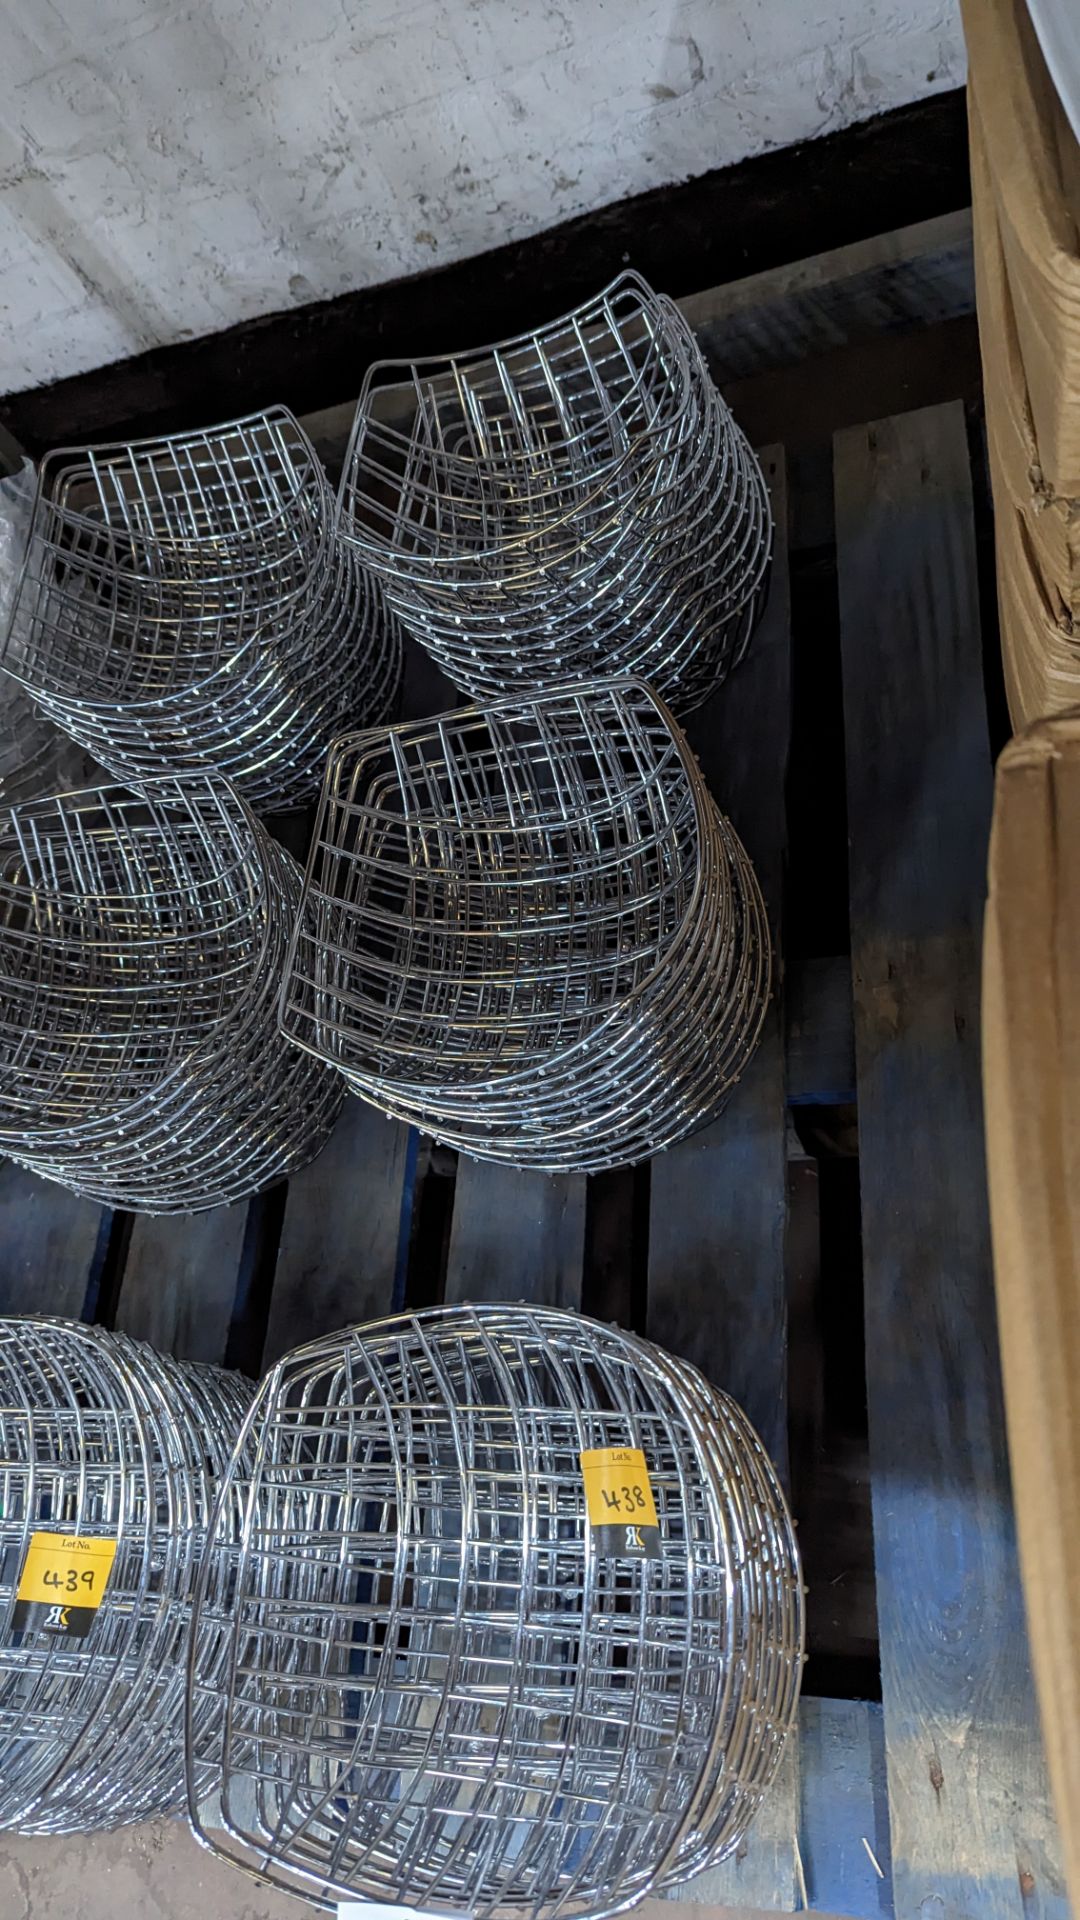 29 off chrome wire baskets each measuring approximately 240mm square - 3 stacks